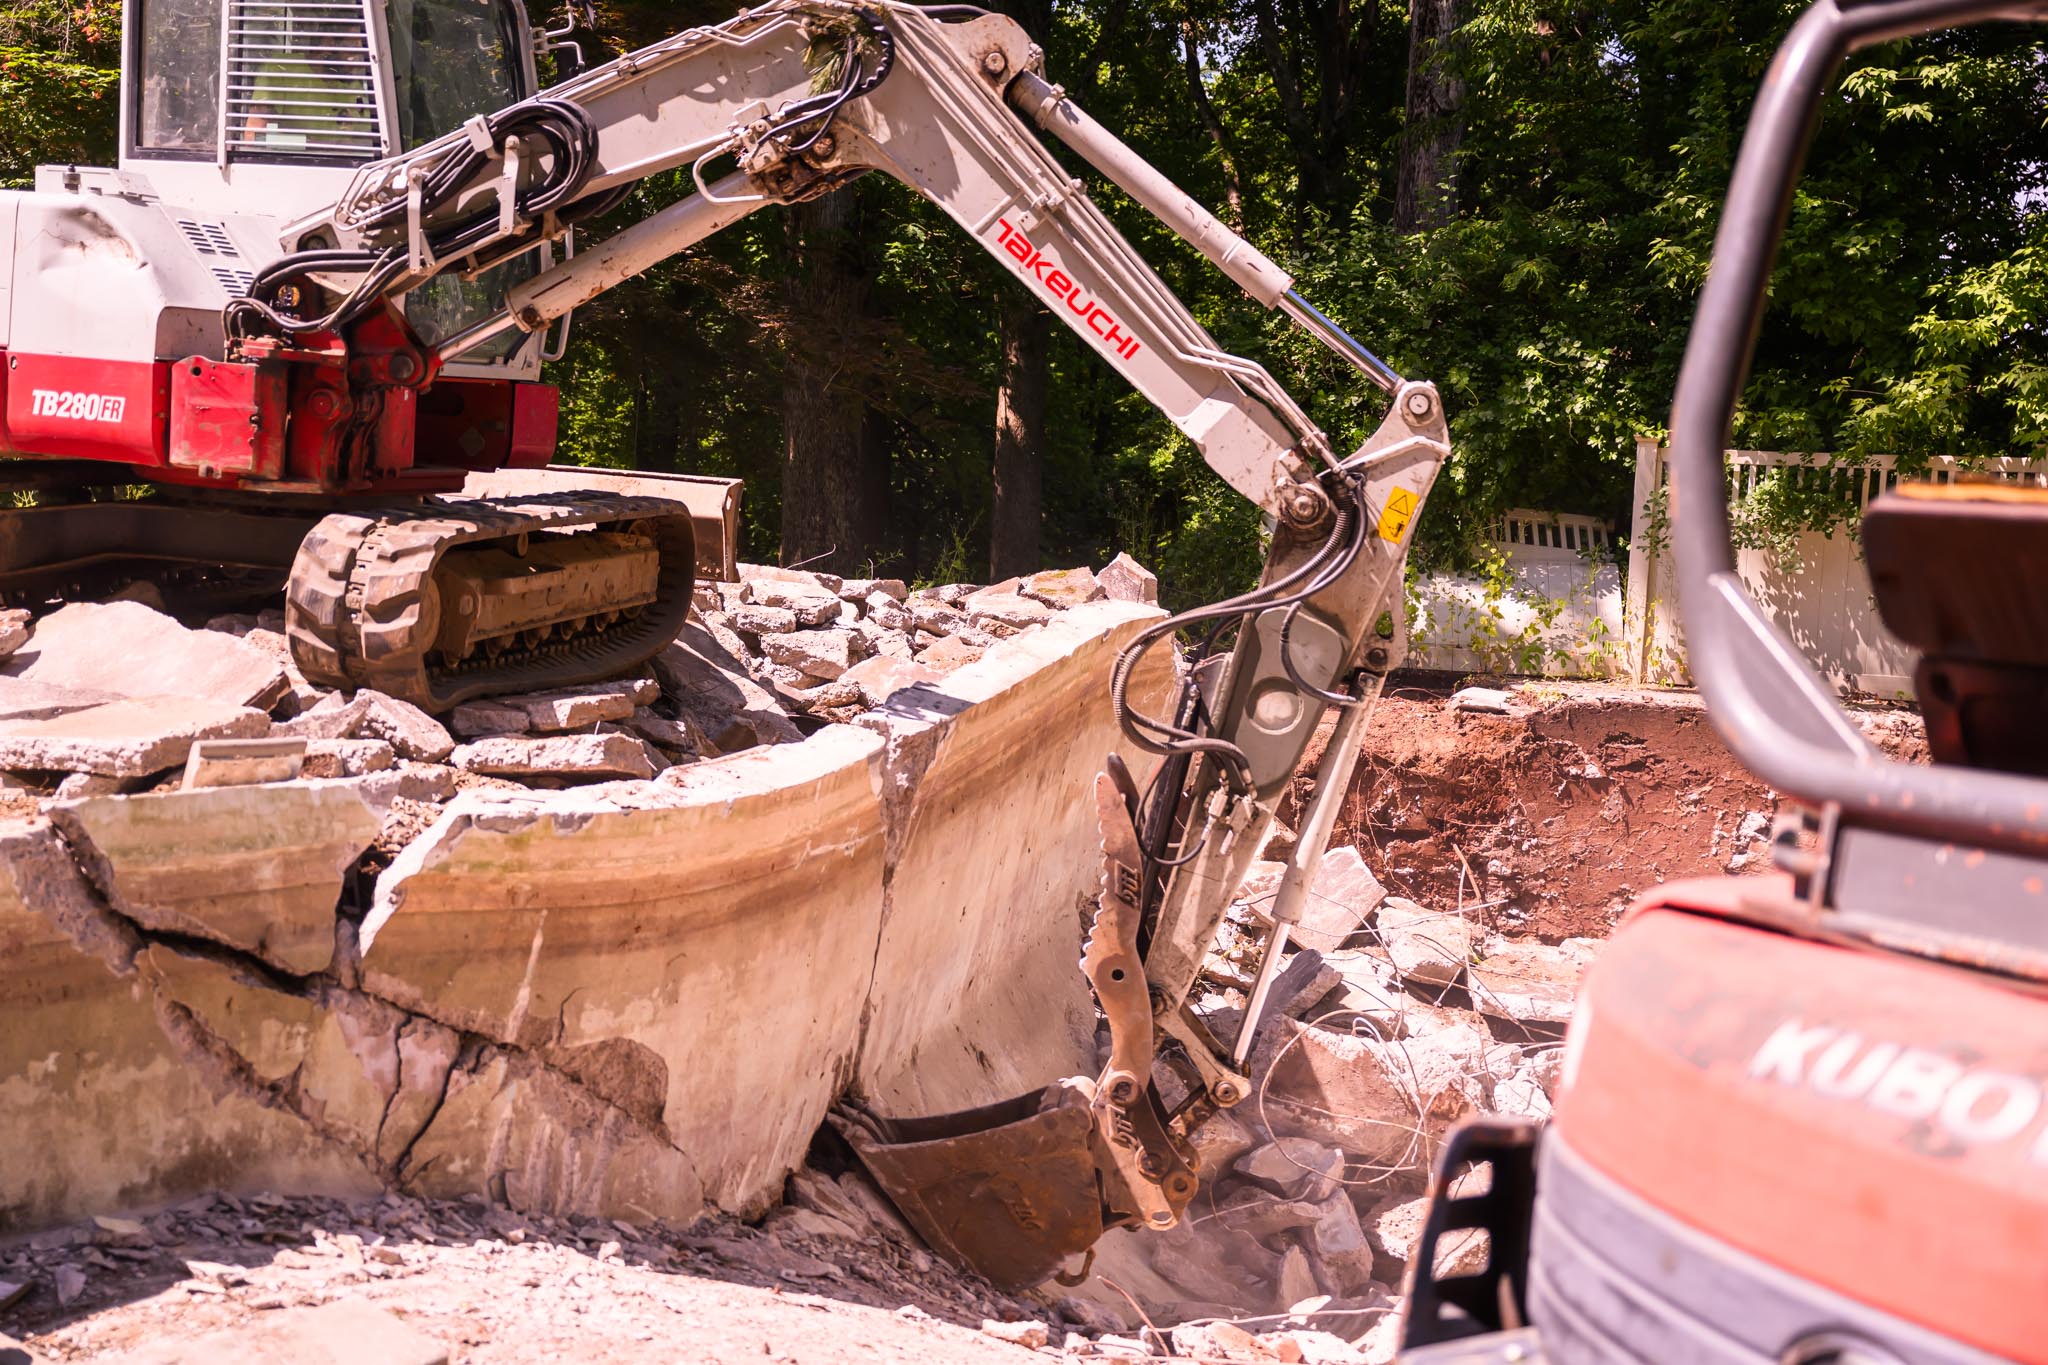 As you can see this excavator is using claw to dismantle concrete.